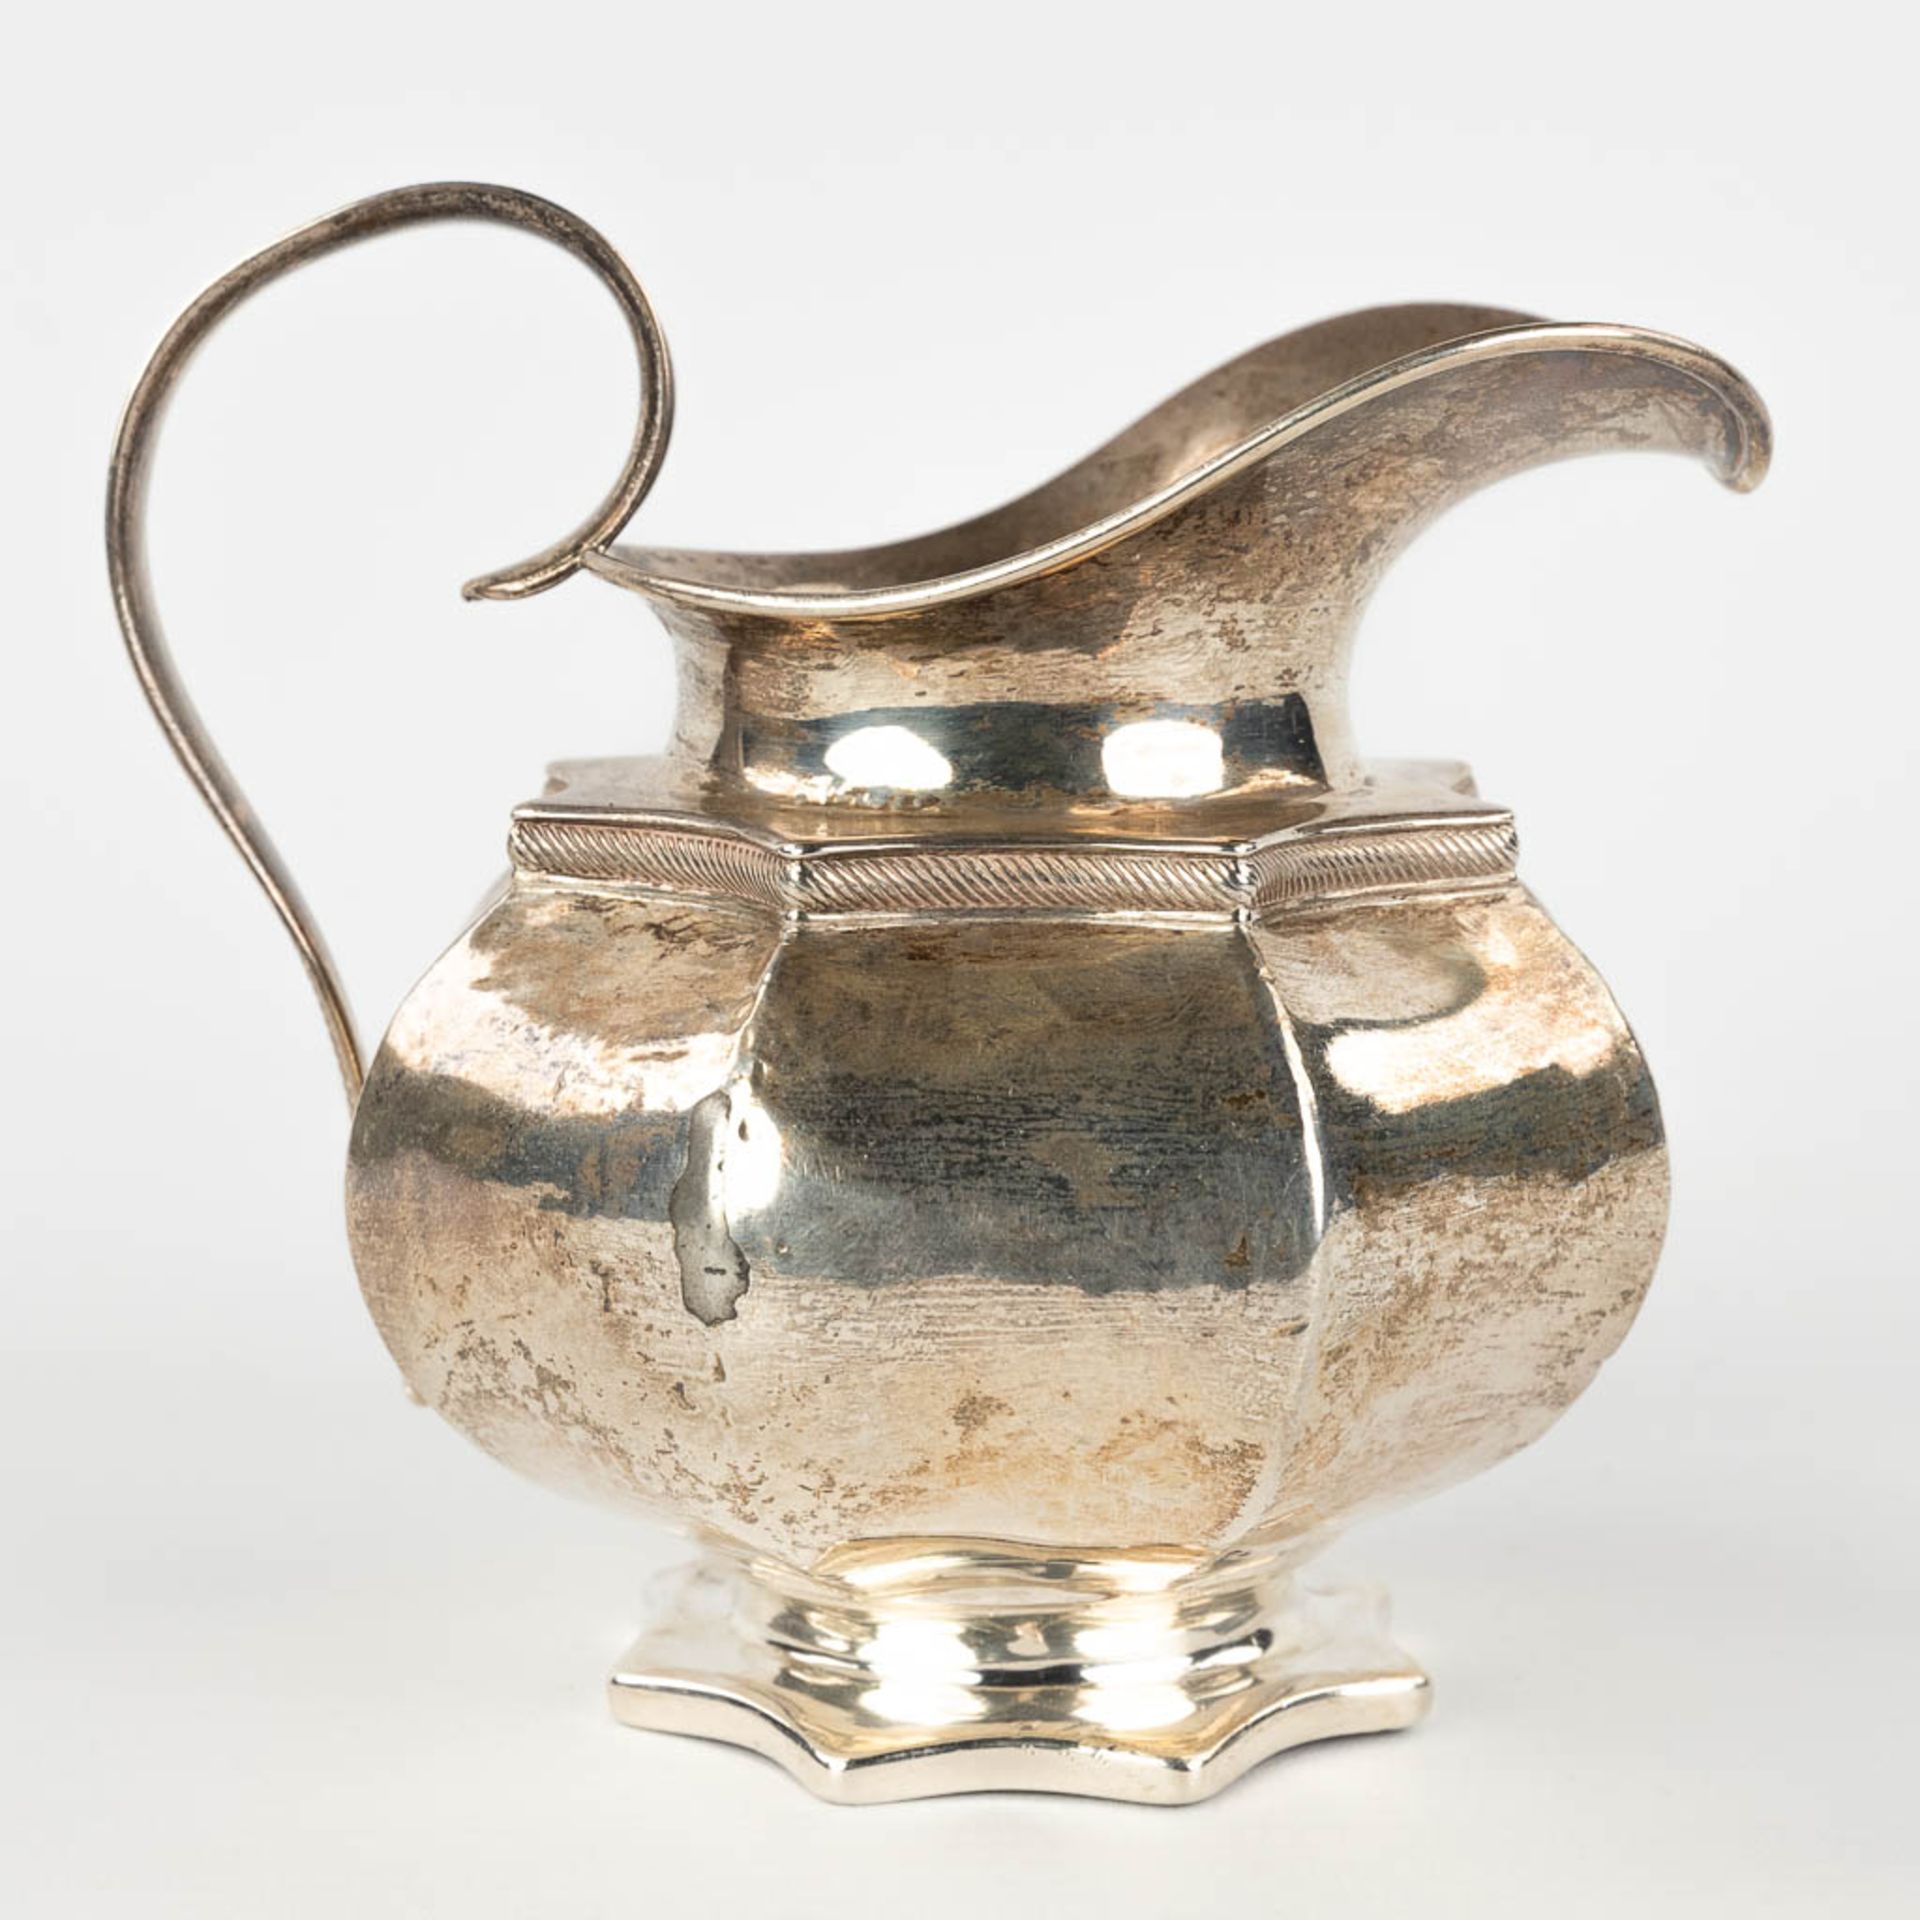 An antique milk jug, silver. The Netherlands, 19th C. 216g. (L: 10 x W: 12,5 x H: 12 cm) - Image 3 of 10